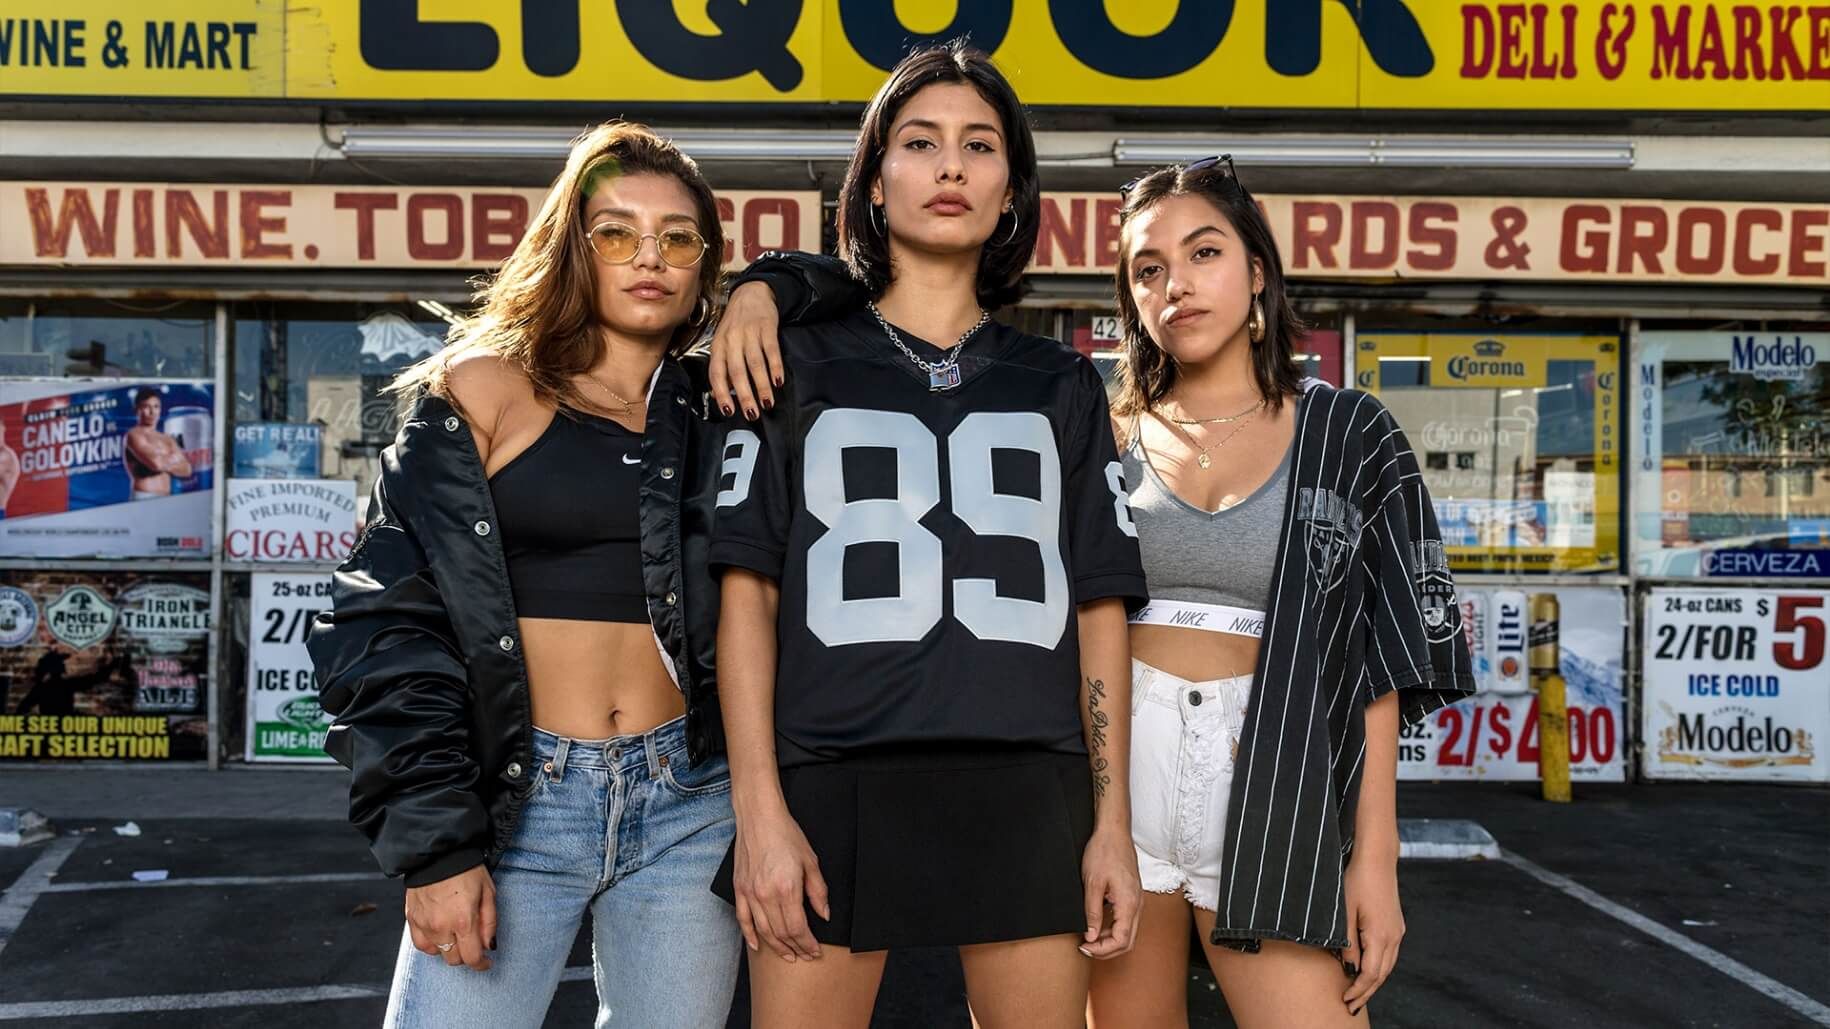 Three Women in front of liquor sttore wearing Raiders clothing and number 89 jersey